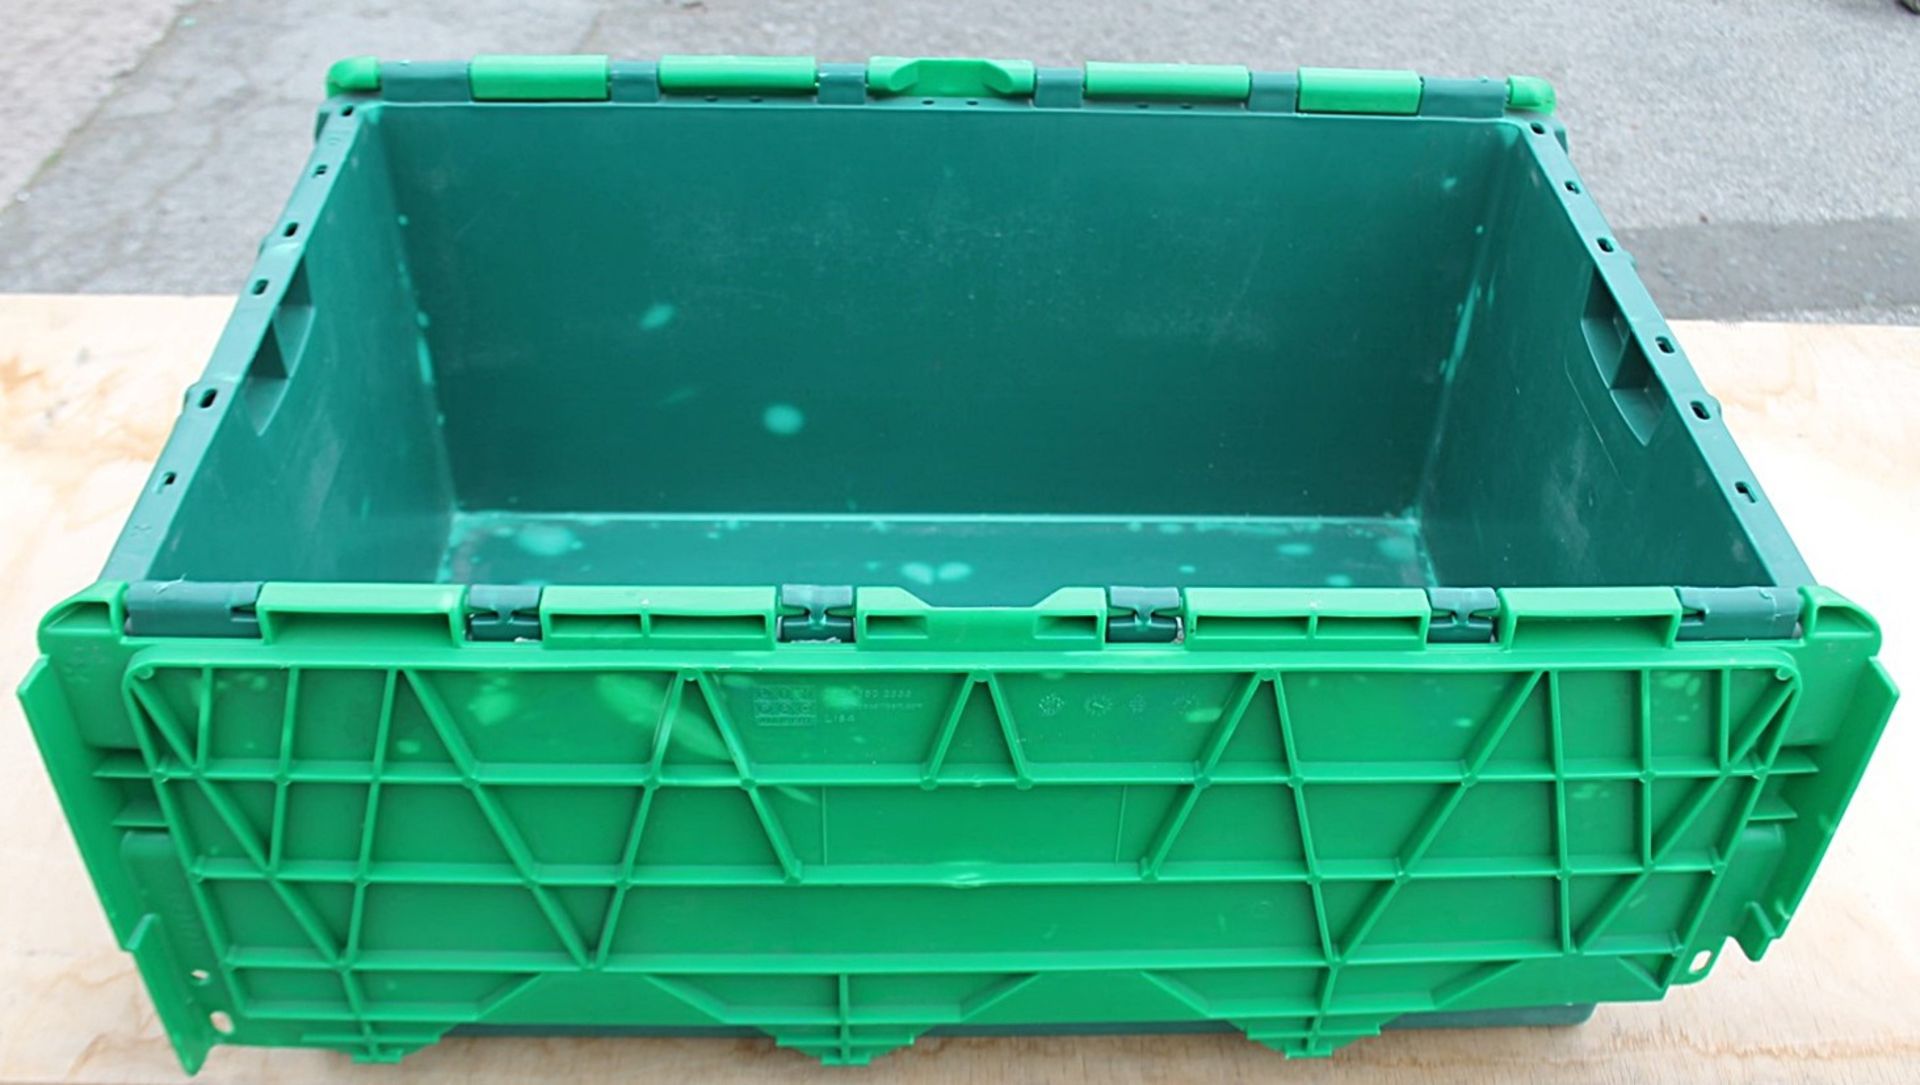 20 x Robust Low Profile Green Plastic Secure Storage Boxes With Attached Hinged Lids - Dimensions: - Image 4 of 5